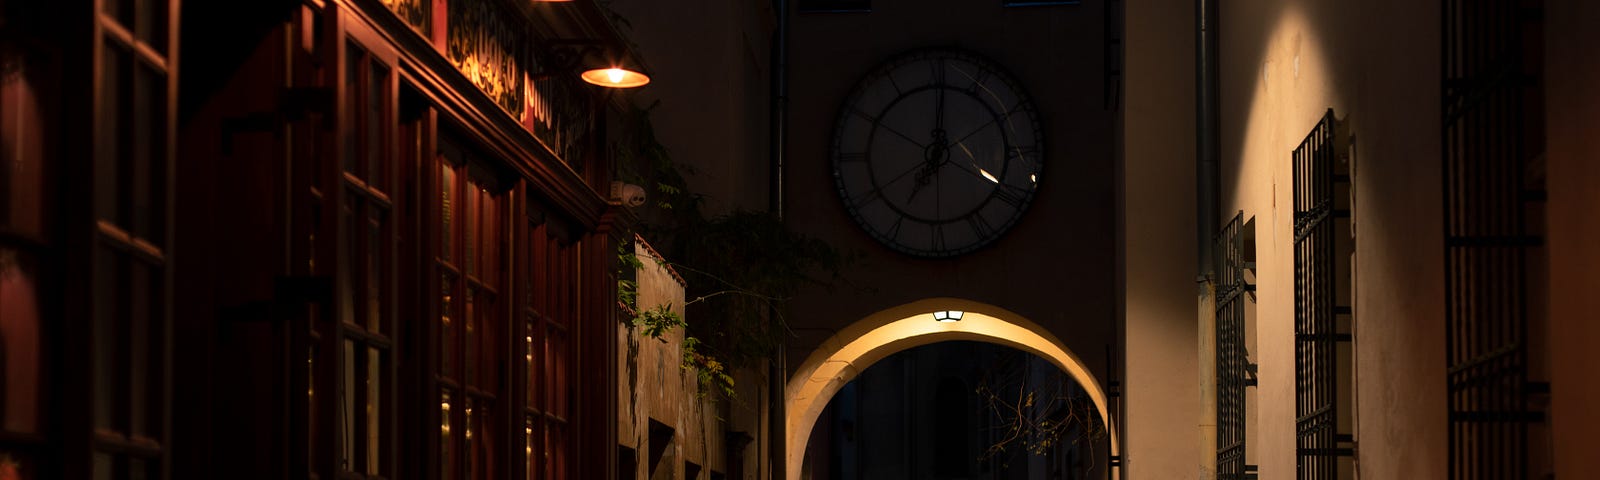 A person in a black suit is seen walking in a dimly lit cobblestone alley. A big clock is over an arch that the person is heading towards.